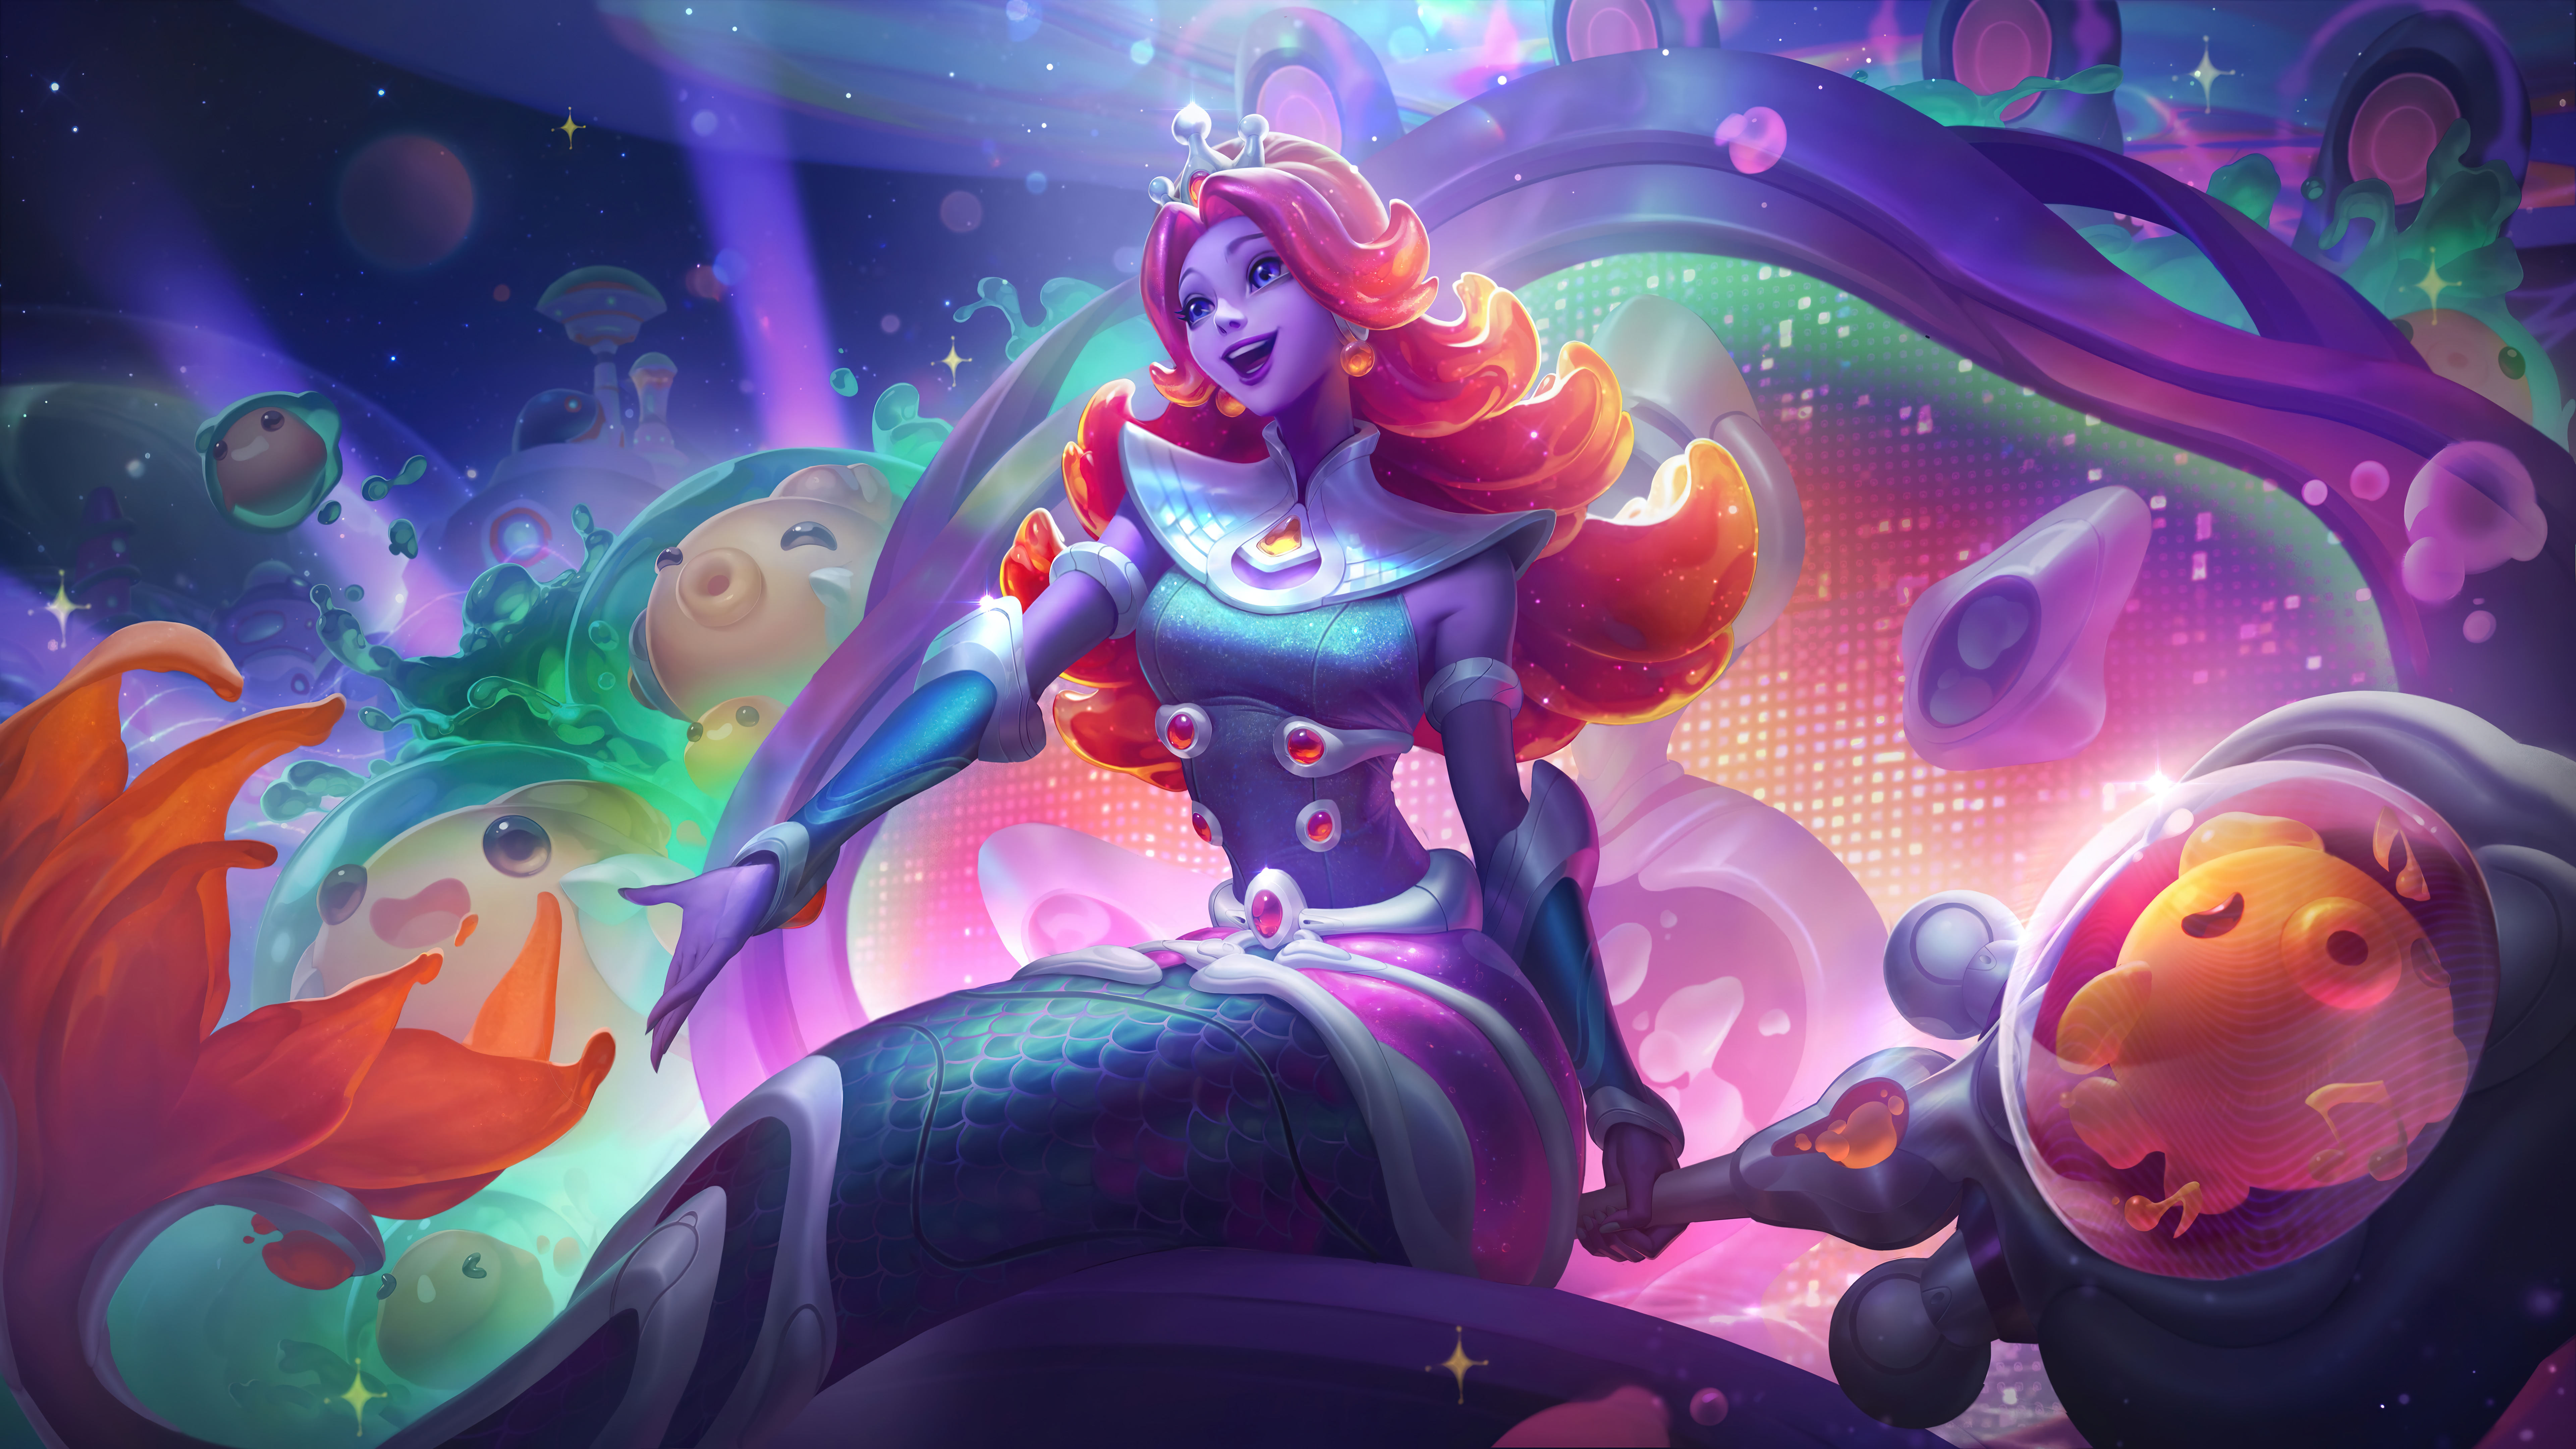 General 7680x4320 Space Groove (League of Legends) Nami (League of Legends) video games GZG 4K Riot Games digital art League of Legends Support (League Of Legends) video game art video game characters video game girls